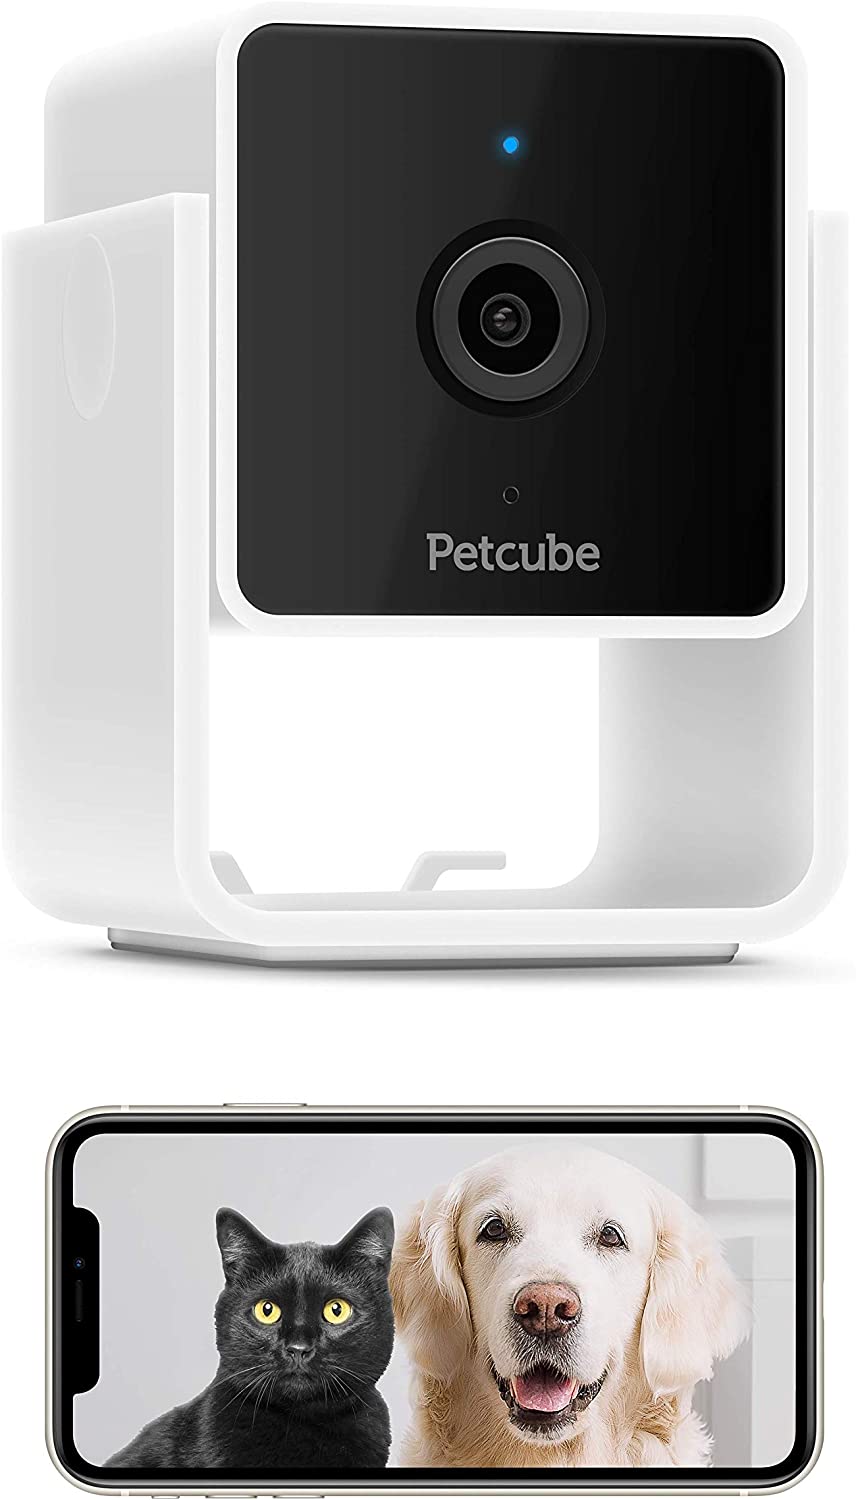 Petcube Cam Pet Monitoring Camera with Built-in Vet Chat for Cats & Dogs